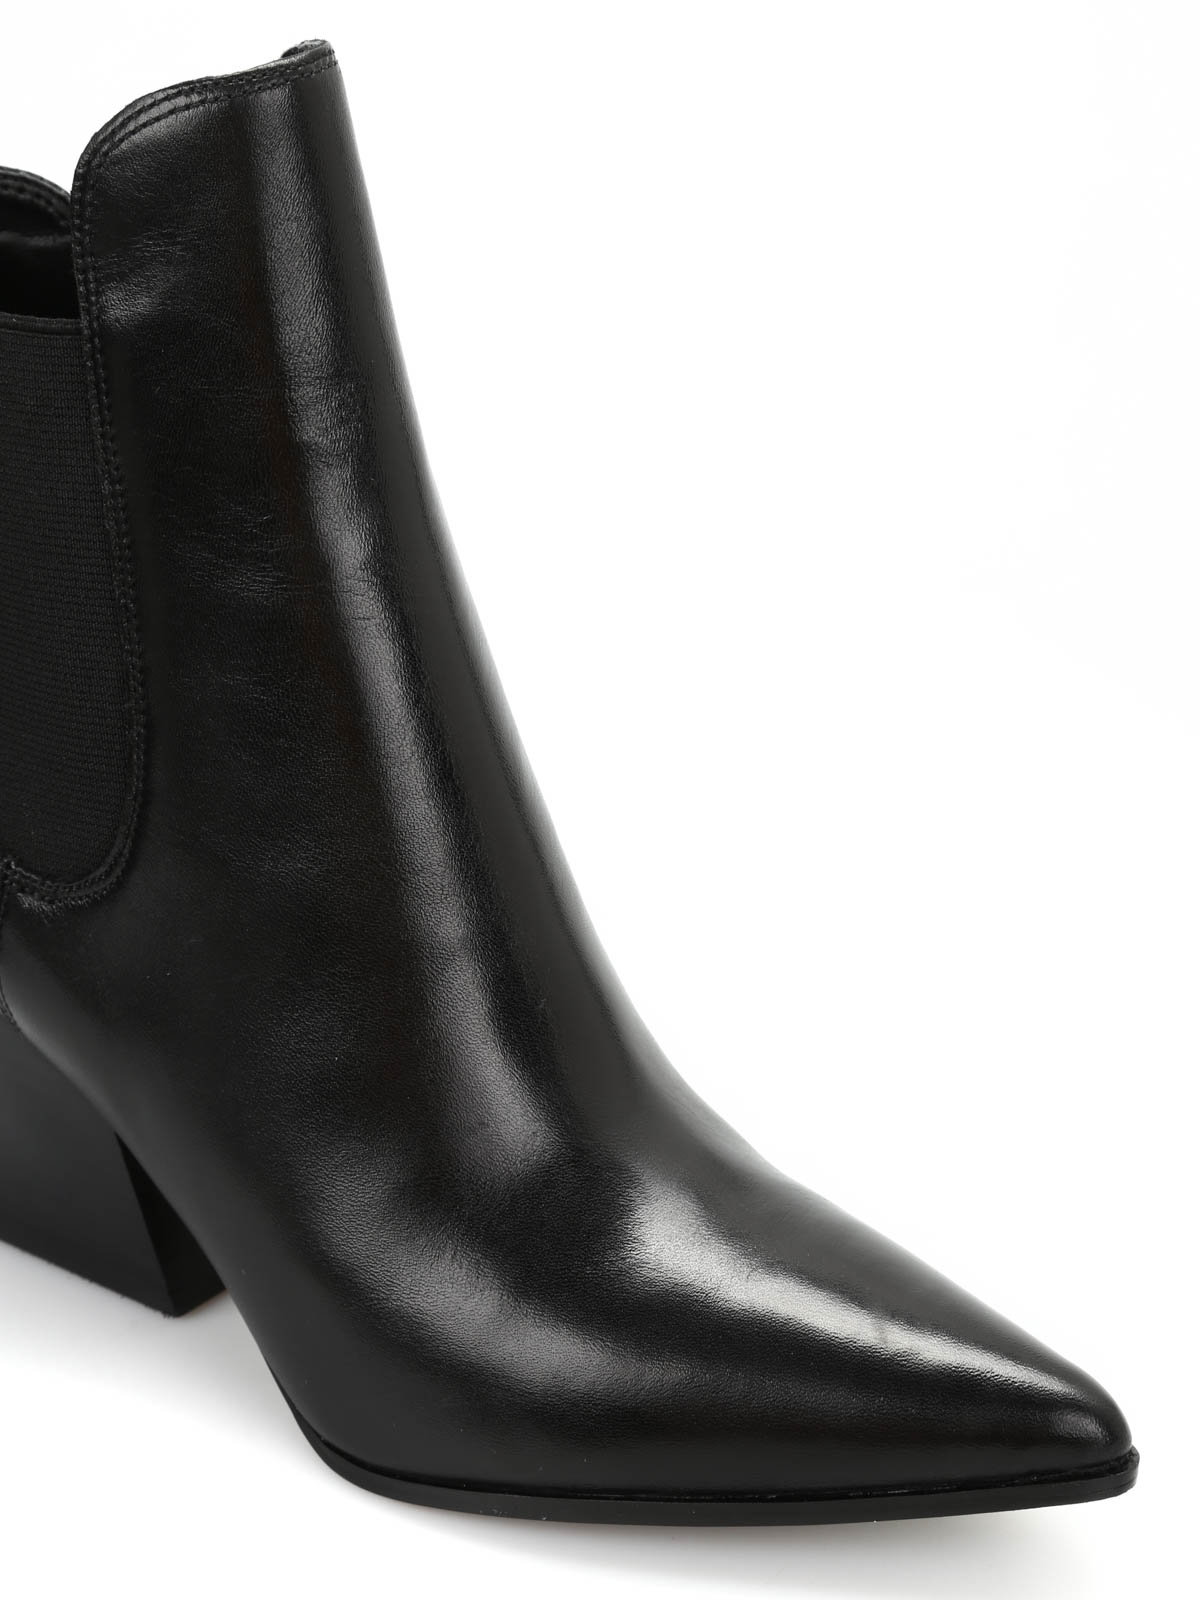 kendall and kylie finley leather boots